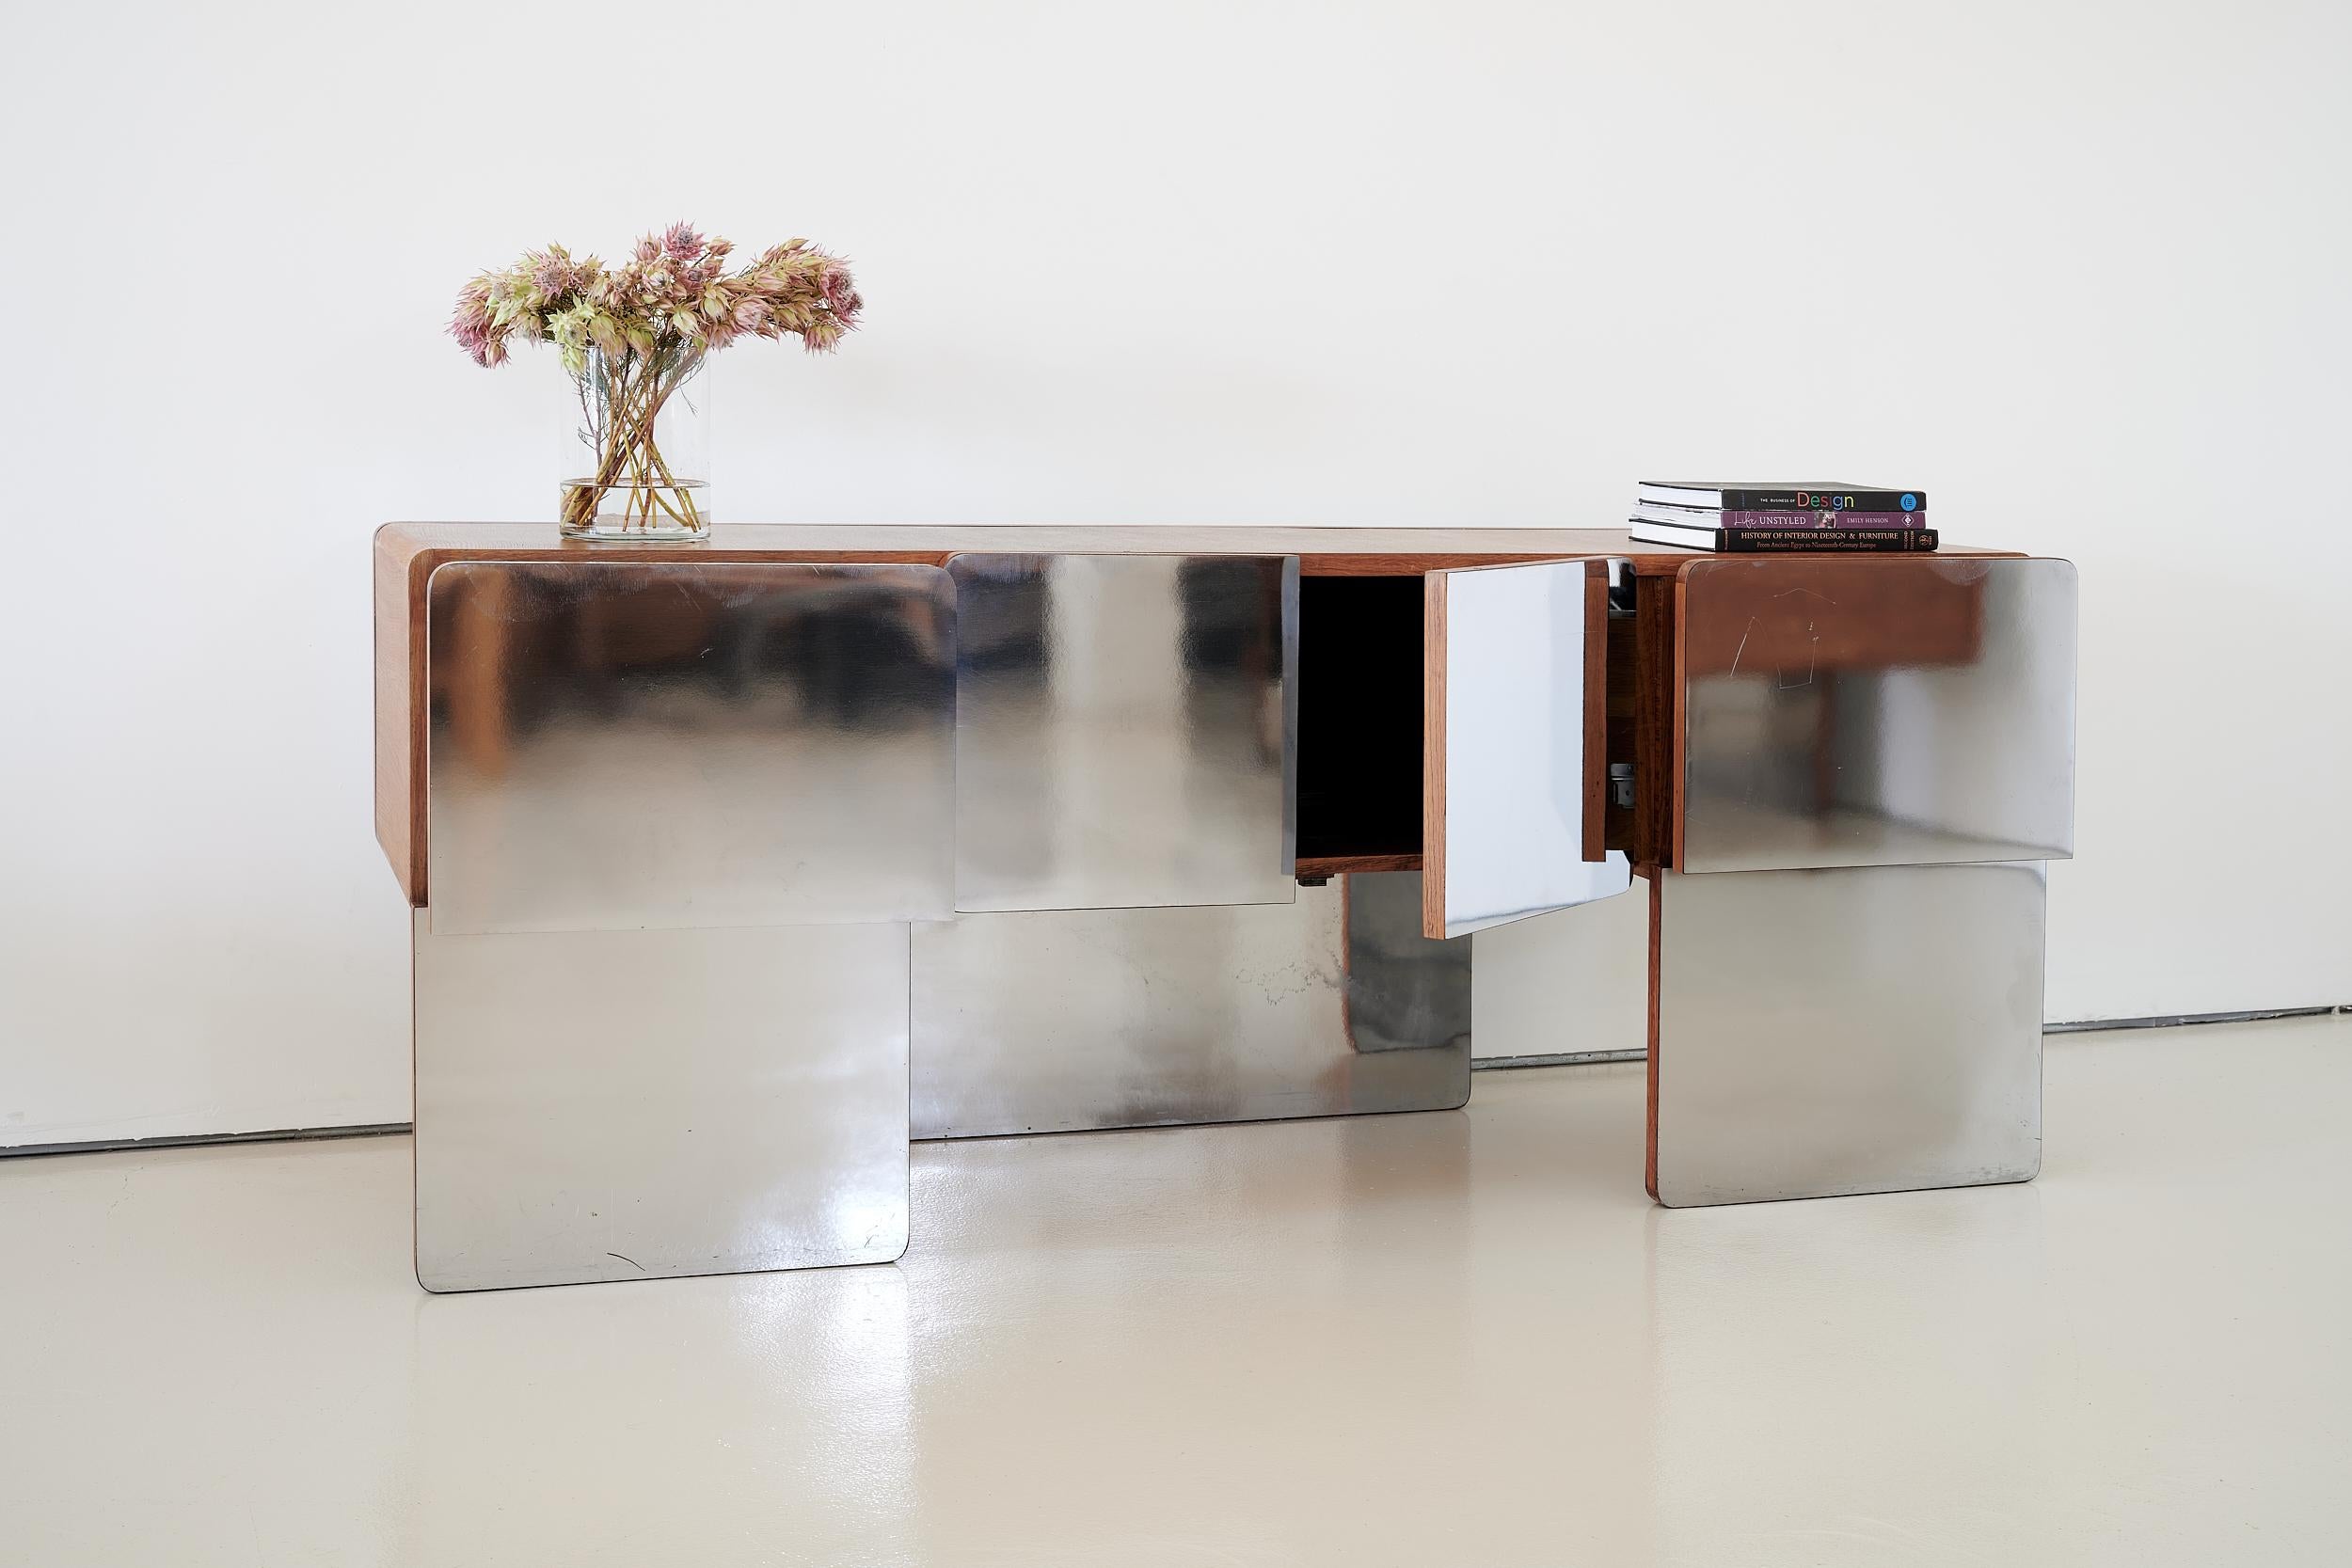 Made in Canada by Xception, Registered design 1976 (marked inside case)

Space Age

Solid wood and wood veneer

Plexiglass-like mirrored veneer on fronts of doors and drawers and backside of the console. Small area of light patina on the